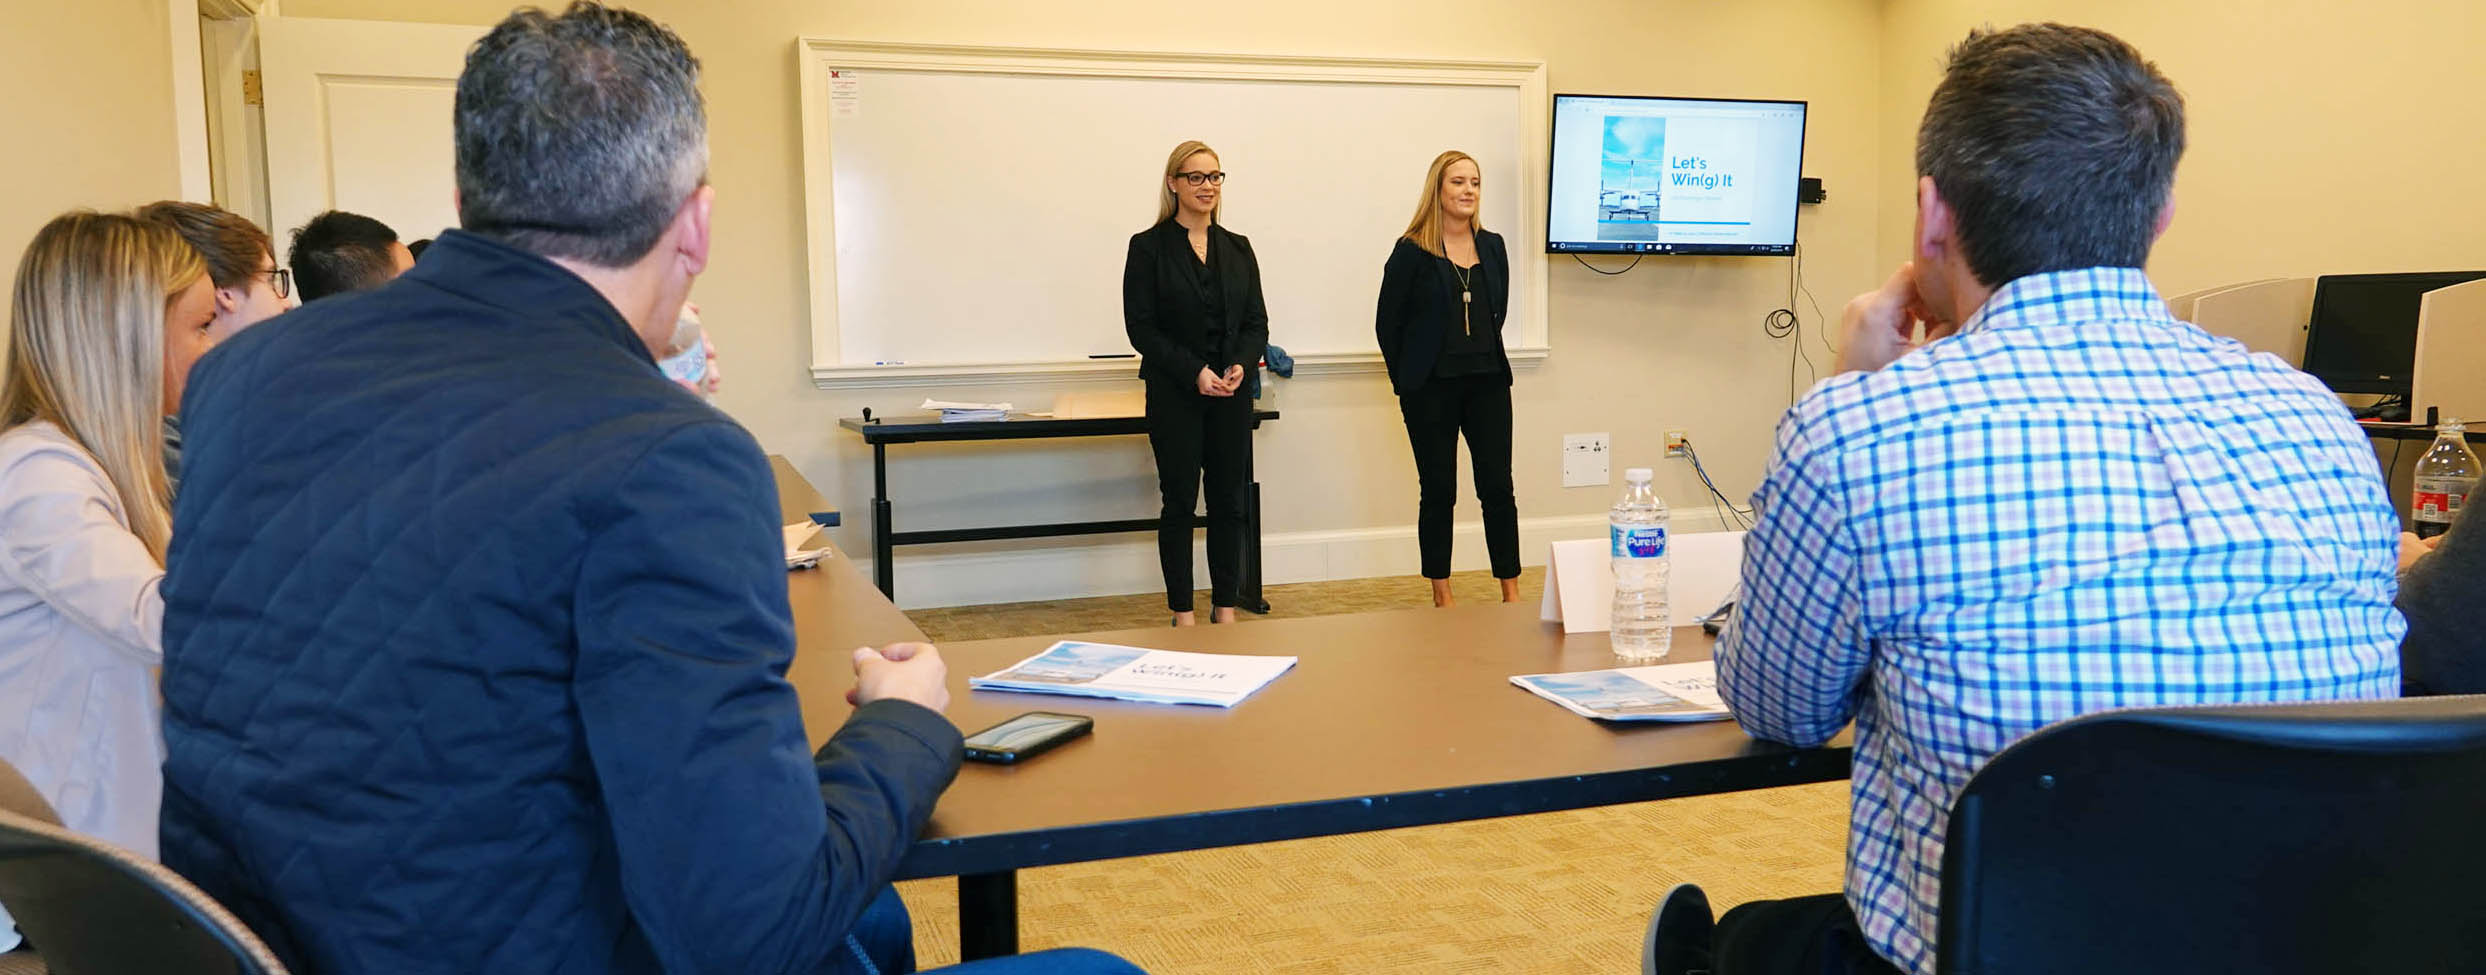 Students make a pitch at the Cradle of Marketers